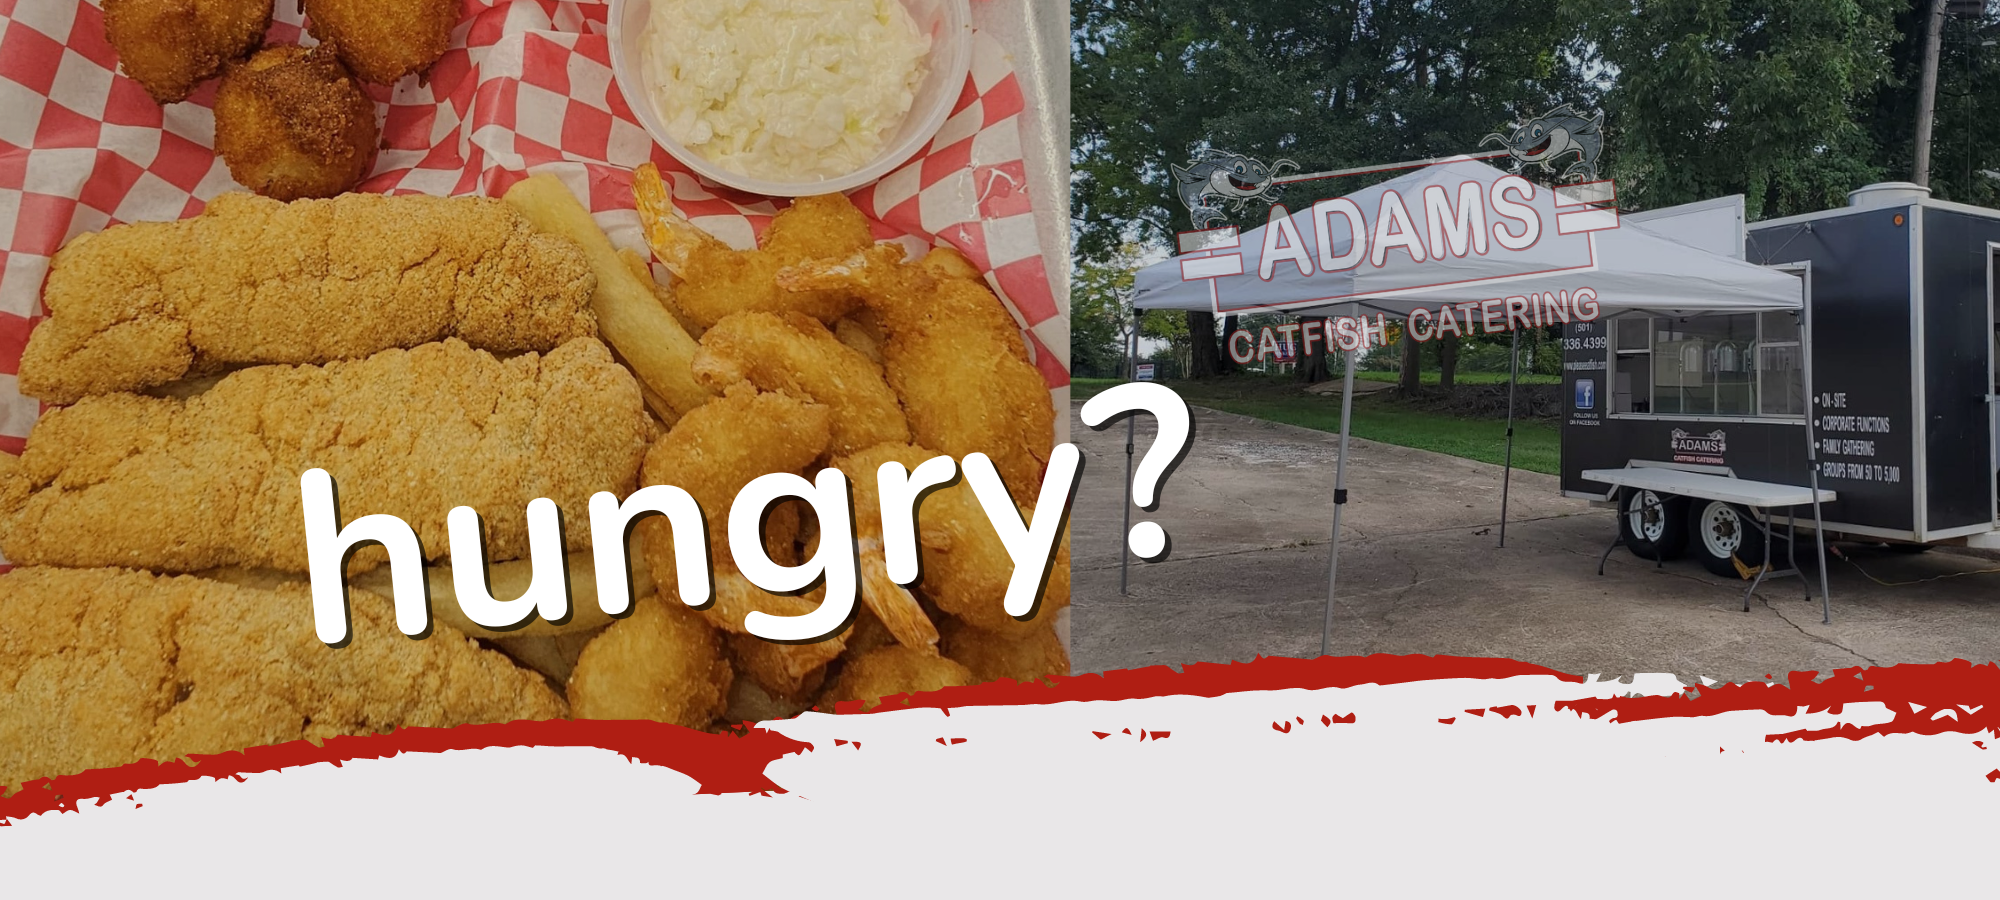 fried catfish and hush puppy plate and catering food truck